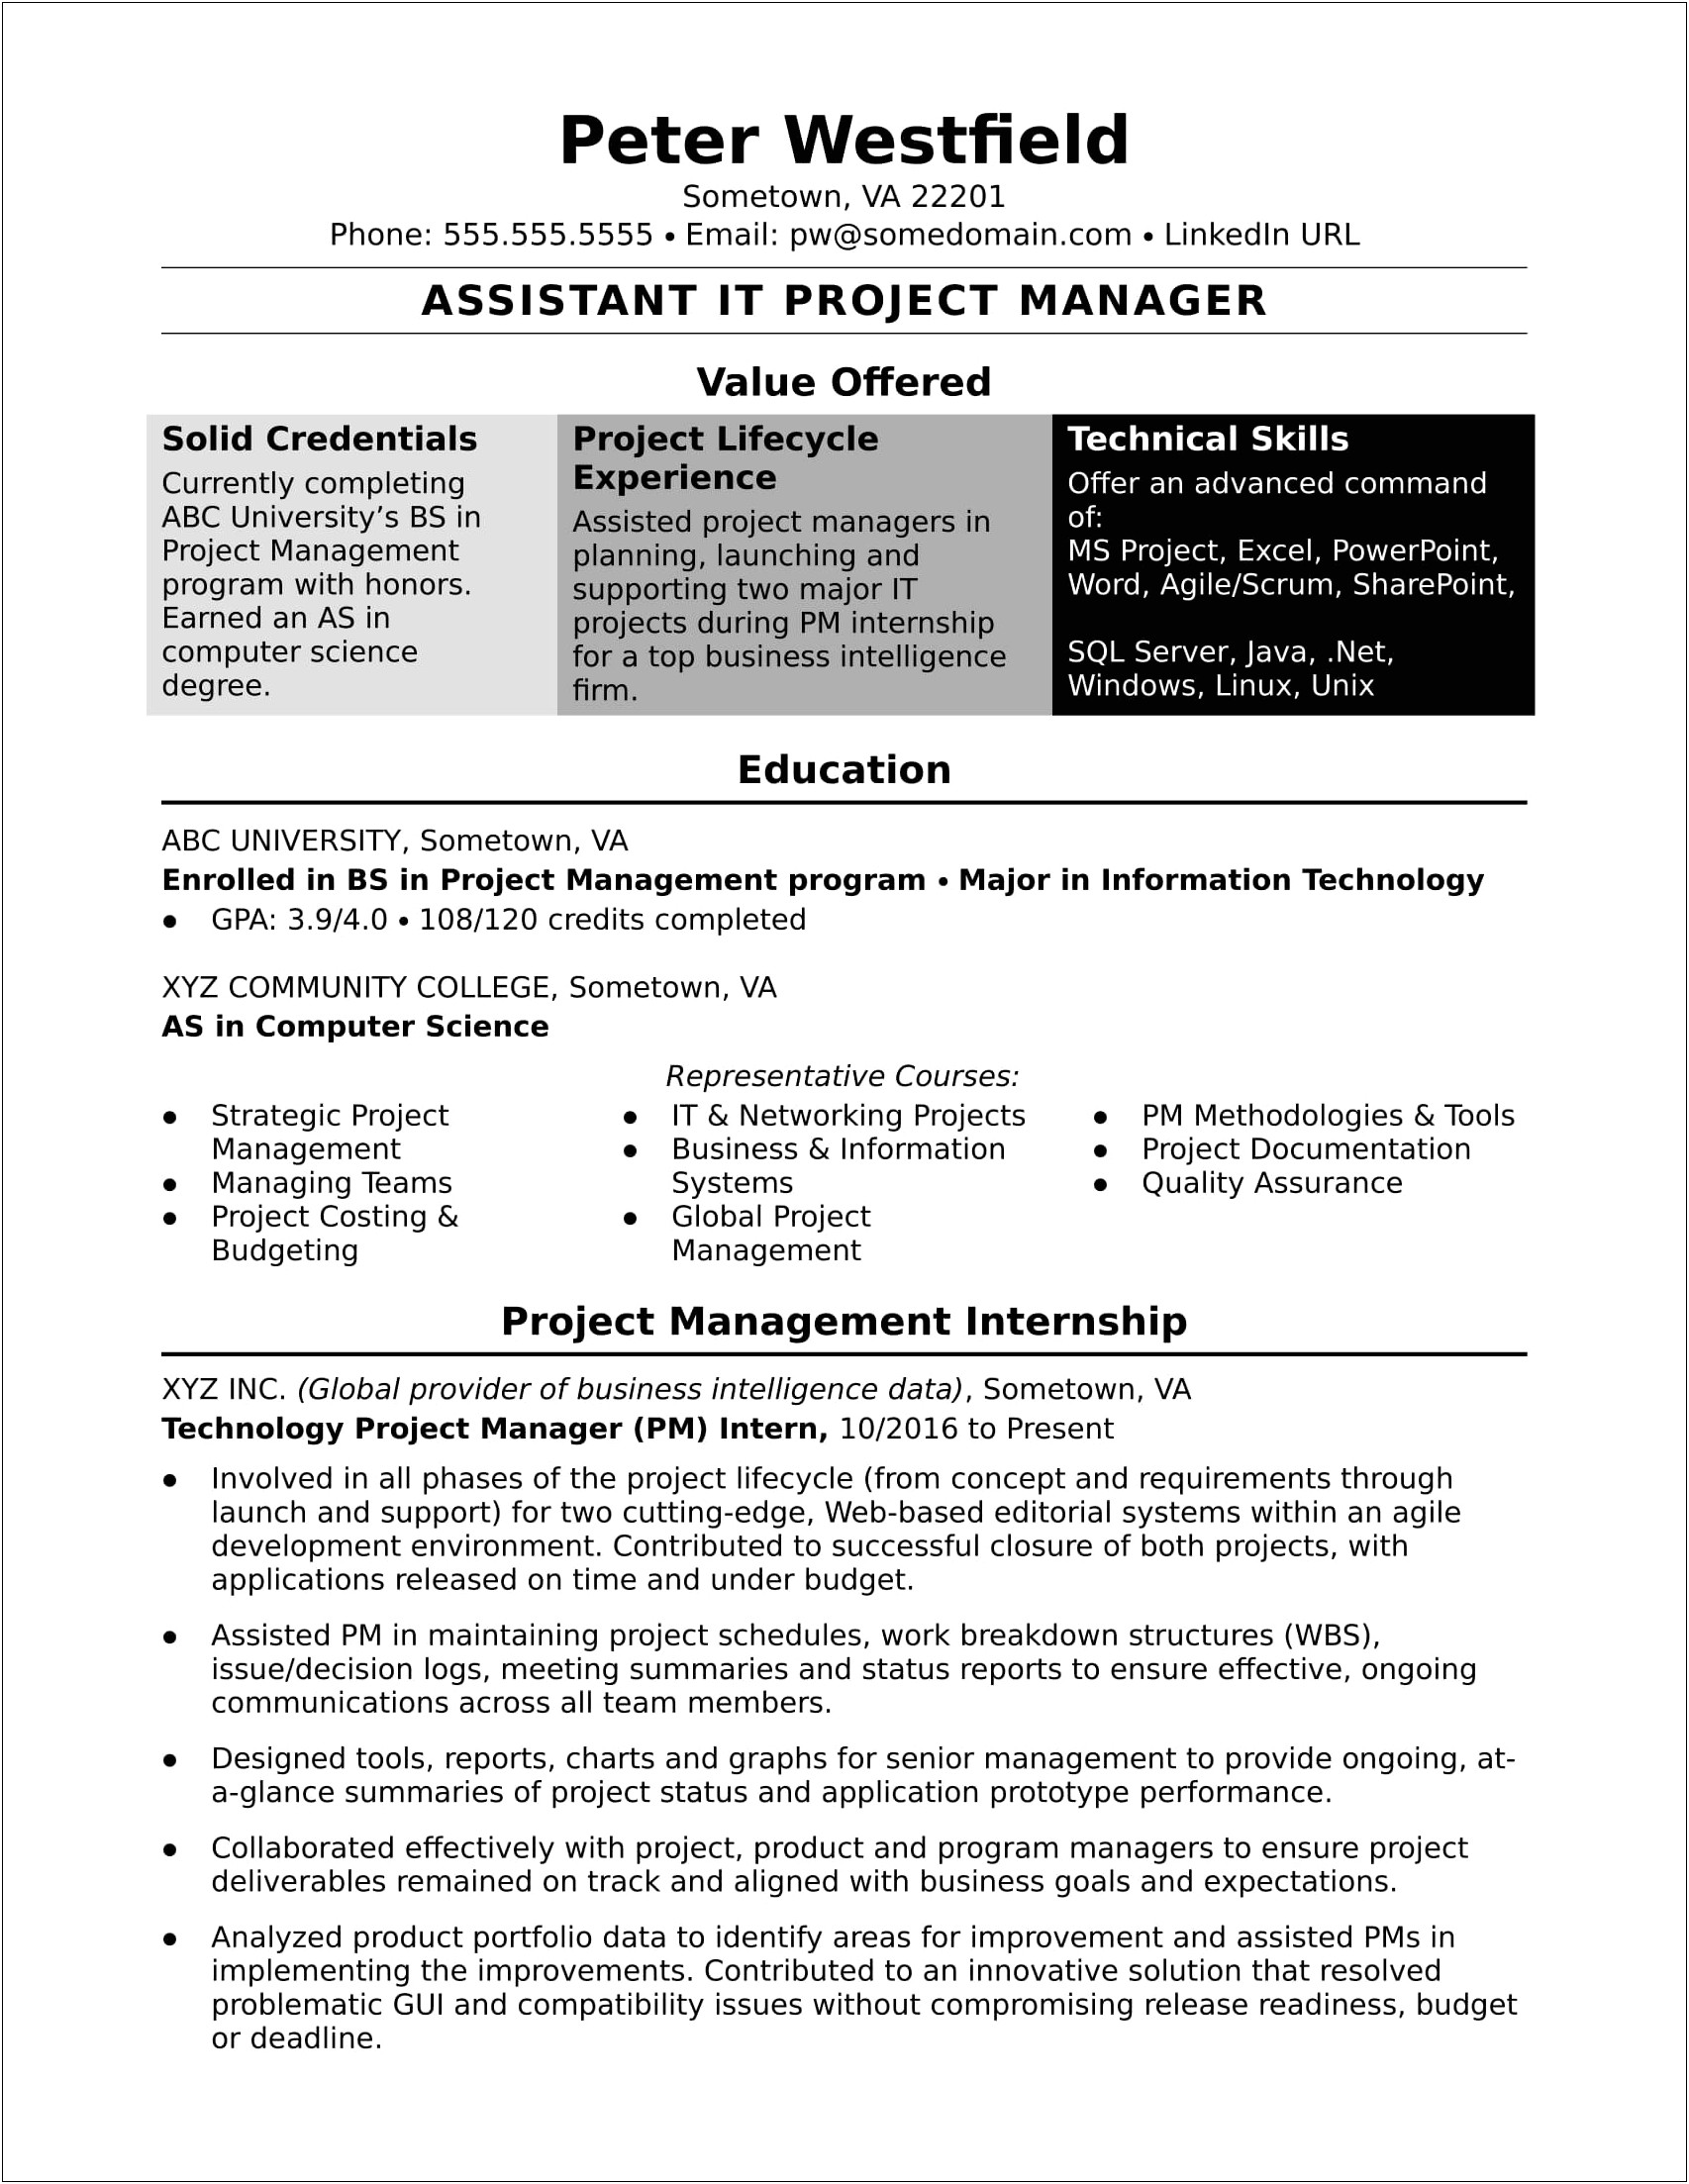 Assistant Project Manager Resume Skills